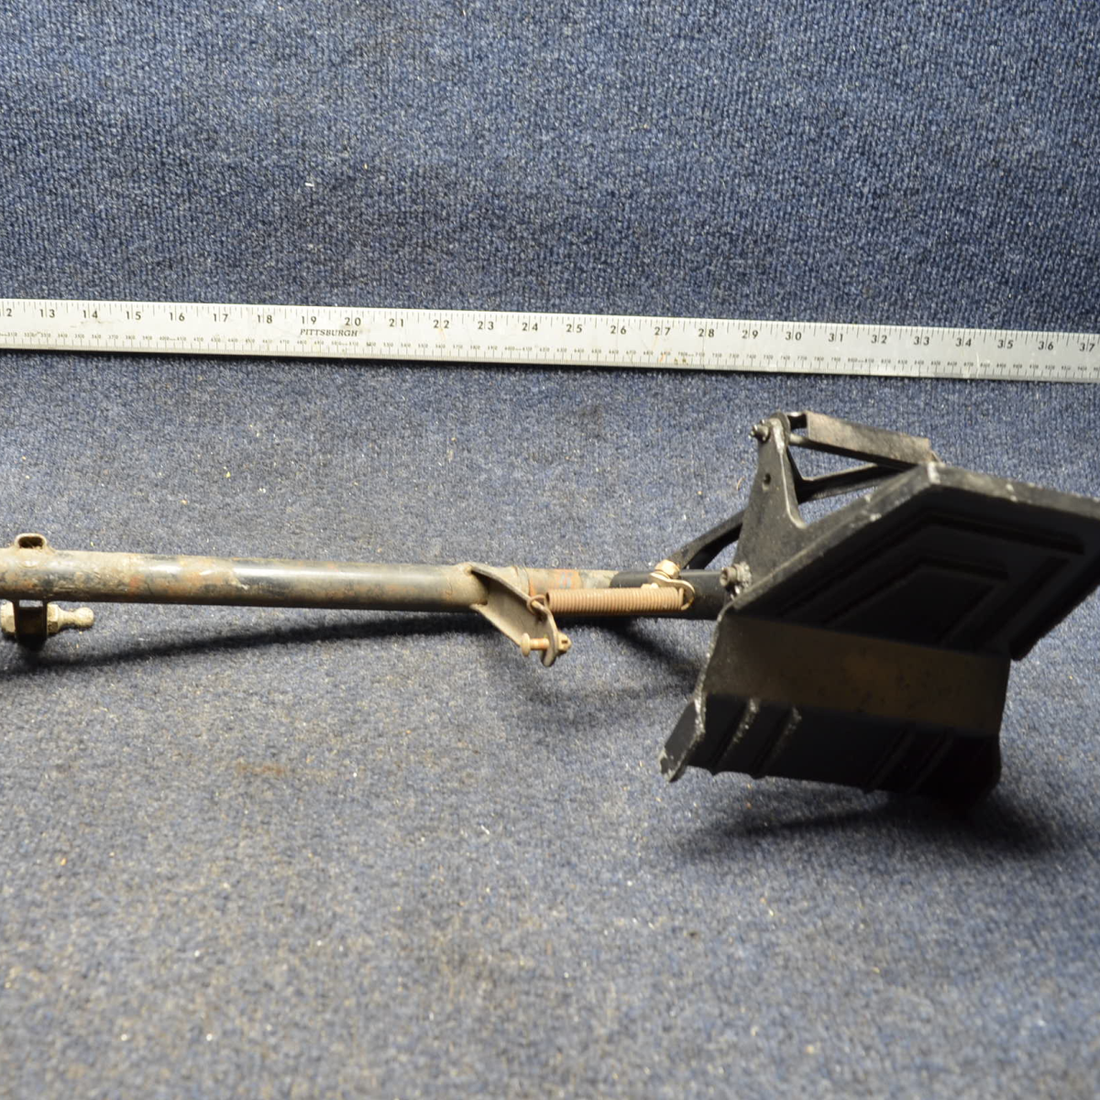 Used aircraft parts for sale, 0760675-1 Cessna 182P RUDDER ARM ASSY BAR  W/ONE PEDAL LH